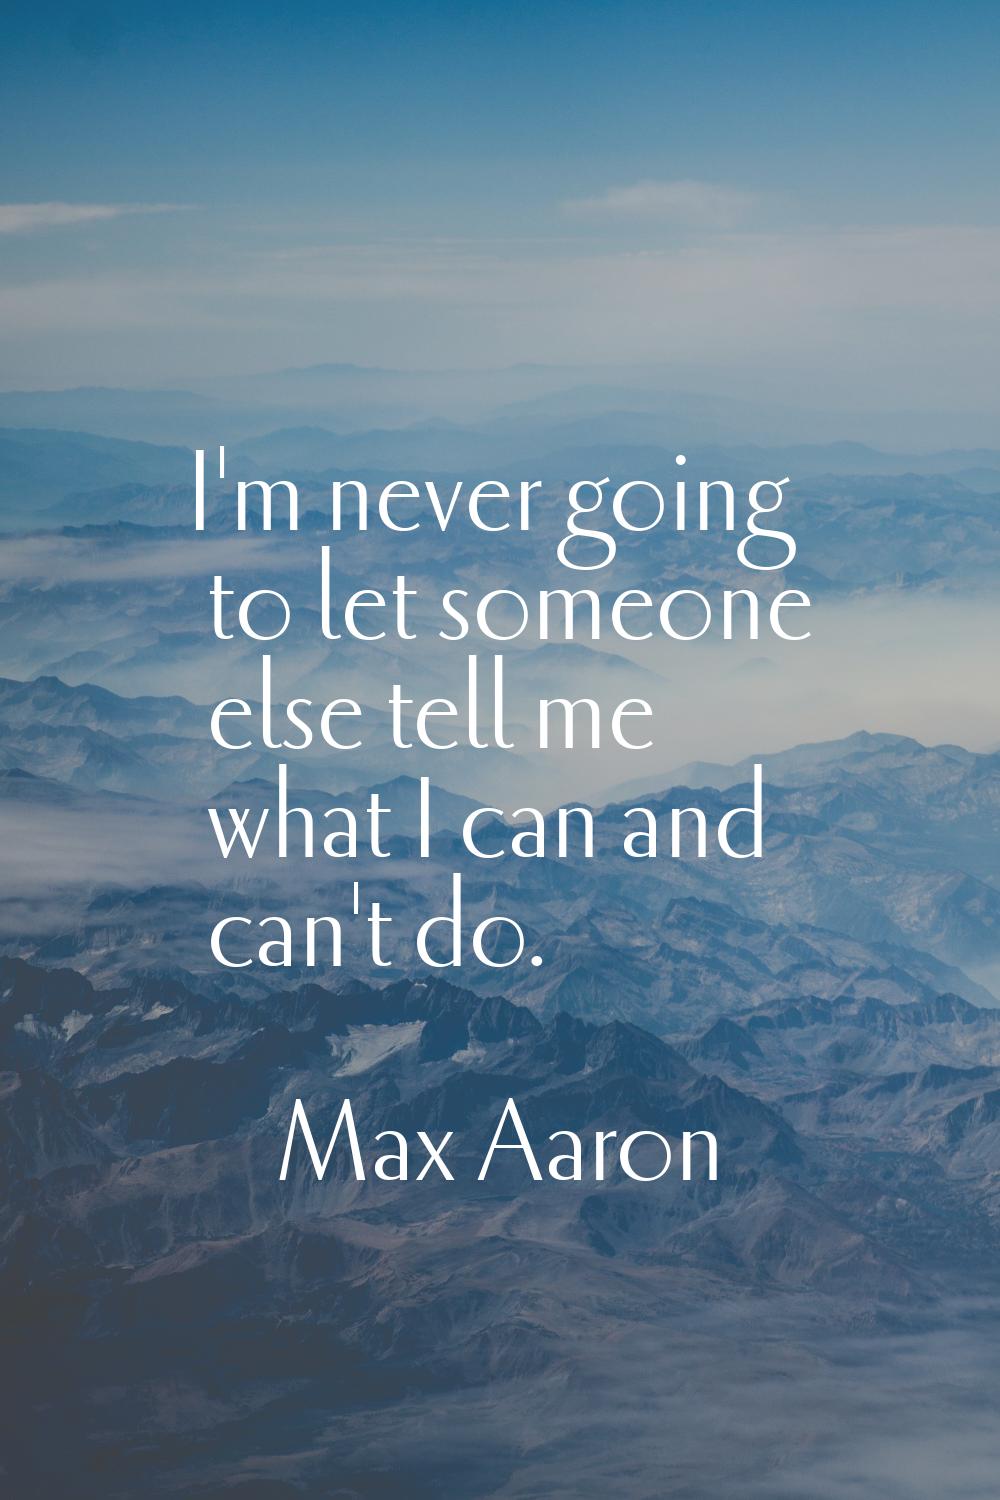 I'm never going to let someone else tell me what I can and can't do.